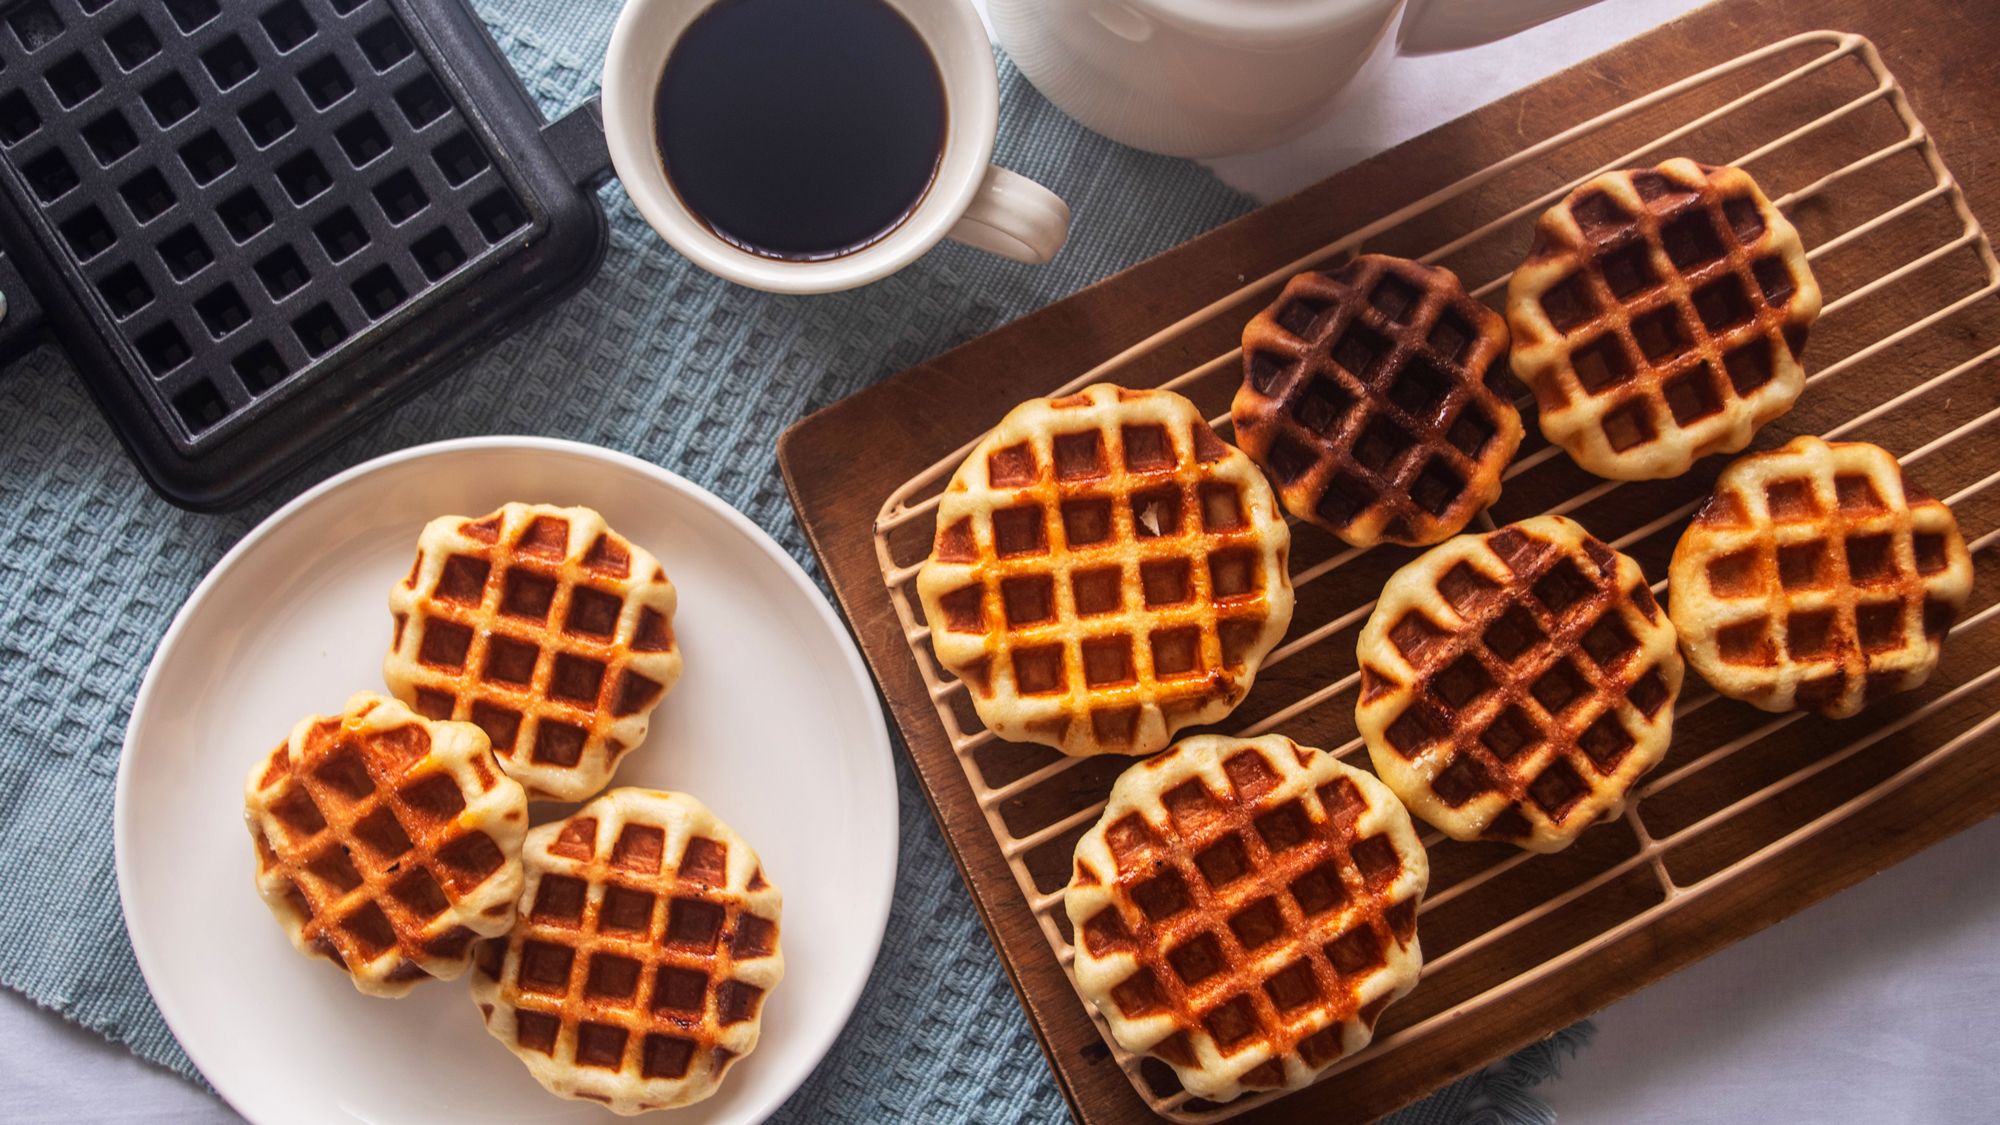 10 Best Mini Waffle Makers Under $40 (2022) - Parade